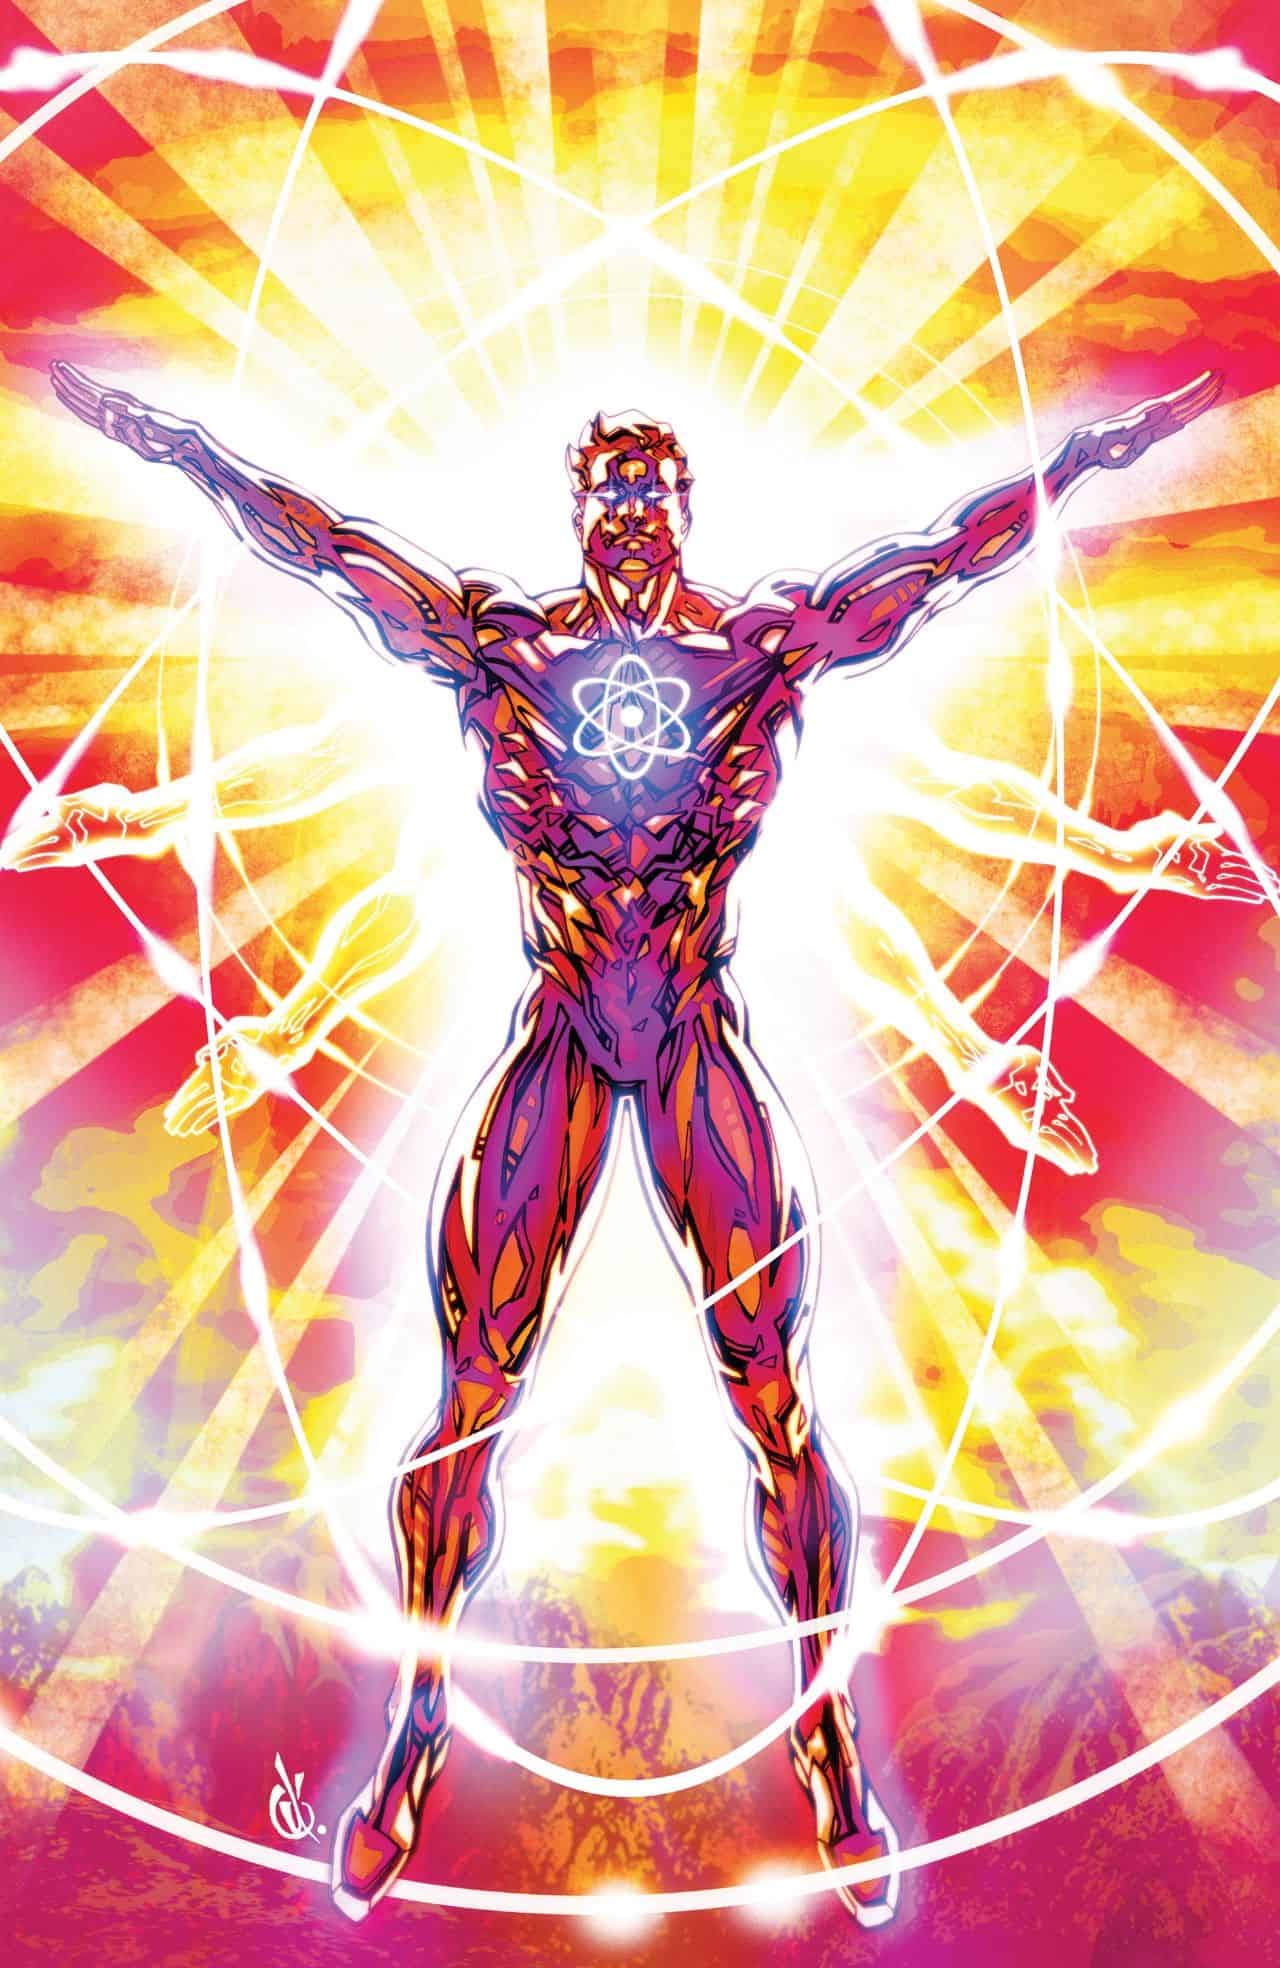 Dc Comics Rebirth Spoilers Fall Rise Of Captain Atom 3 Reveals Captain Atom S New Powers Interim Costume On Road To The Watchmen Rebirth Inside Pulse